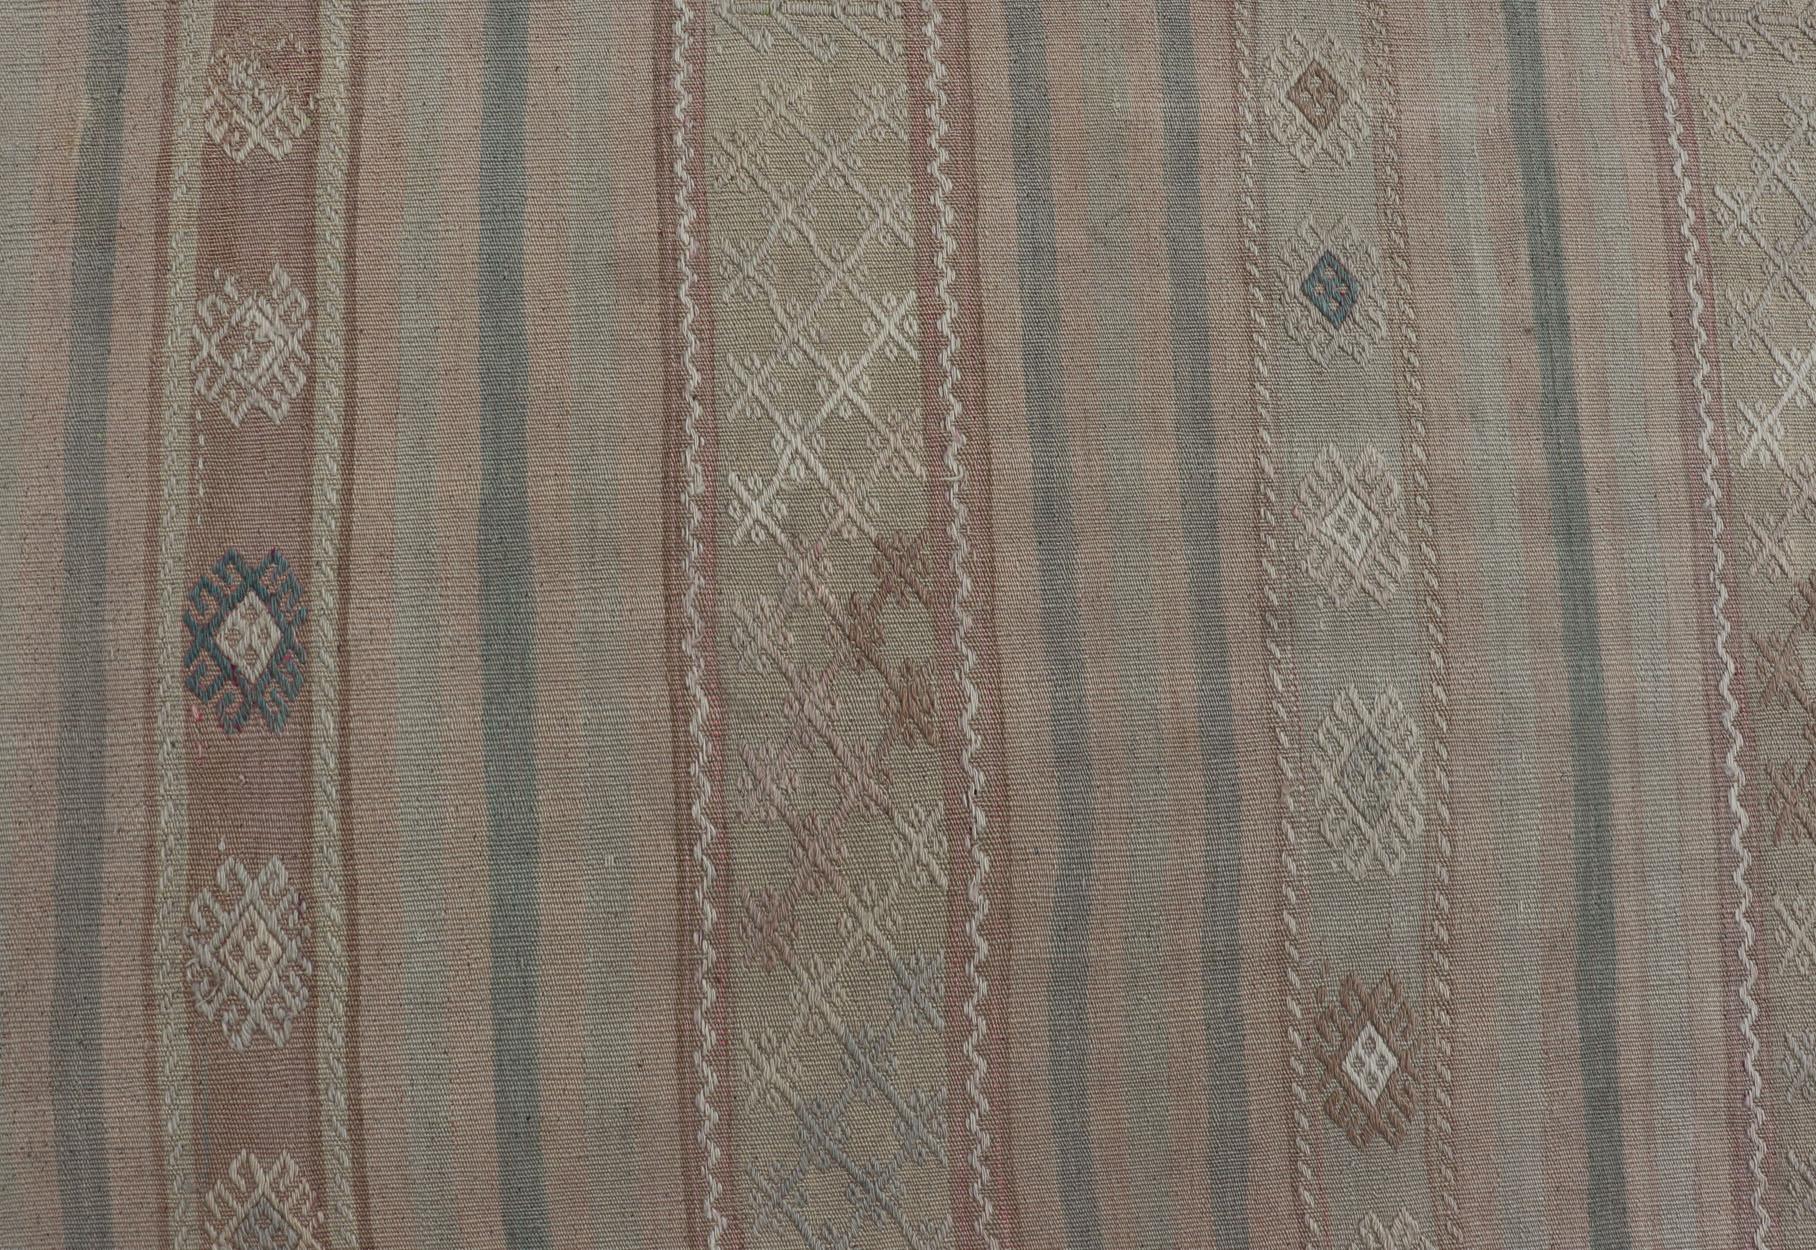 Flat-Weave Turkish Kilim with Embroideries in Earthy Tones and Hints of Pink. 
geometric stripe design Vintage Kilim from Turkey. Keivan Woven Arts / rug EN-179255, country of origin / type: Turkey / Kilim, circa 1950

This vintage flat-woven